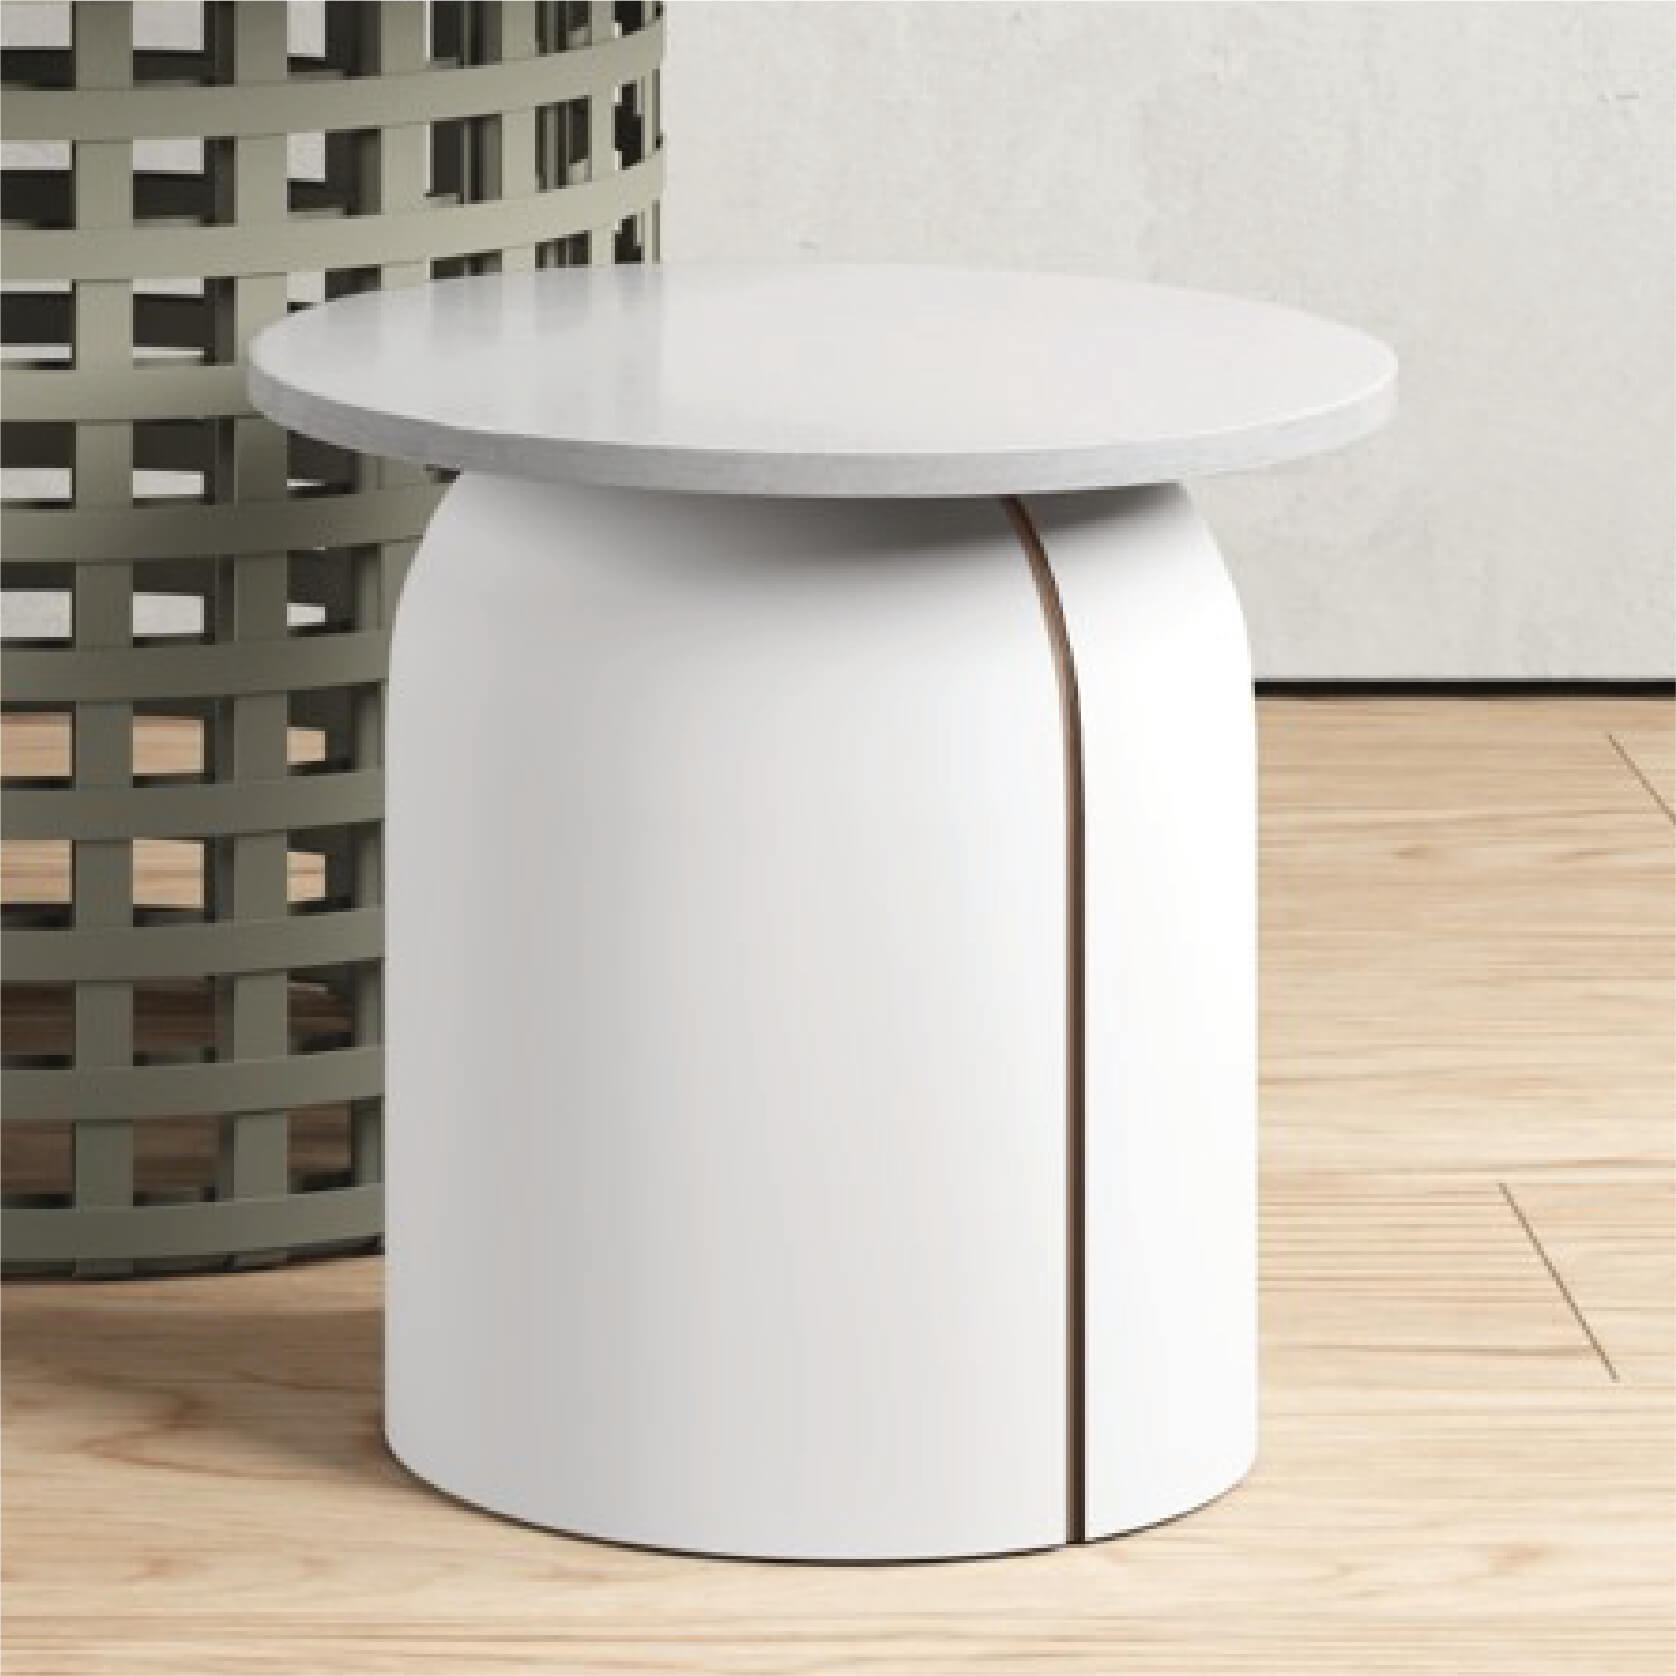 SOL SIDE TABLE by Stonesets - Design Commune Feature